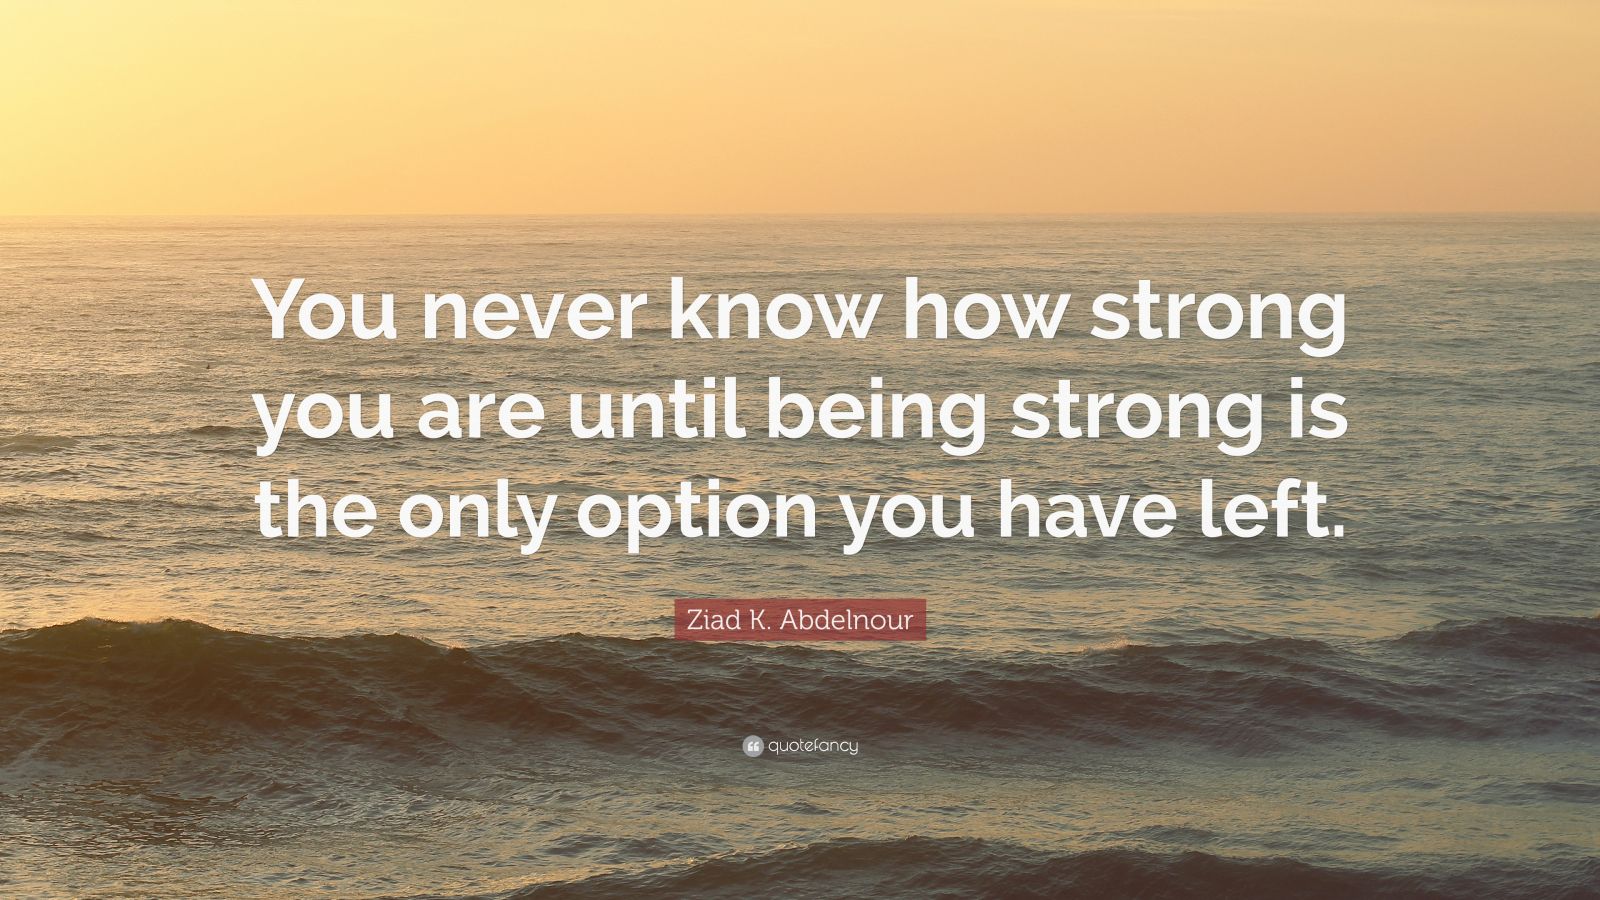 Ziad K Abdelnour Quote You Never Know How Strong You Are Until Being Strong Is The Only Option You Have Left